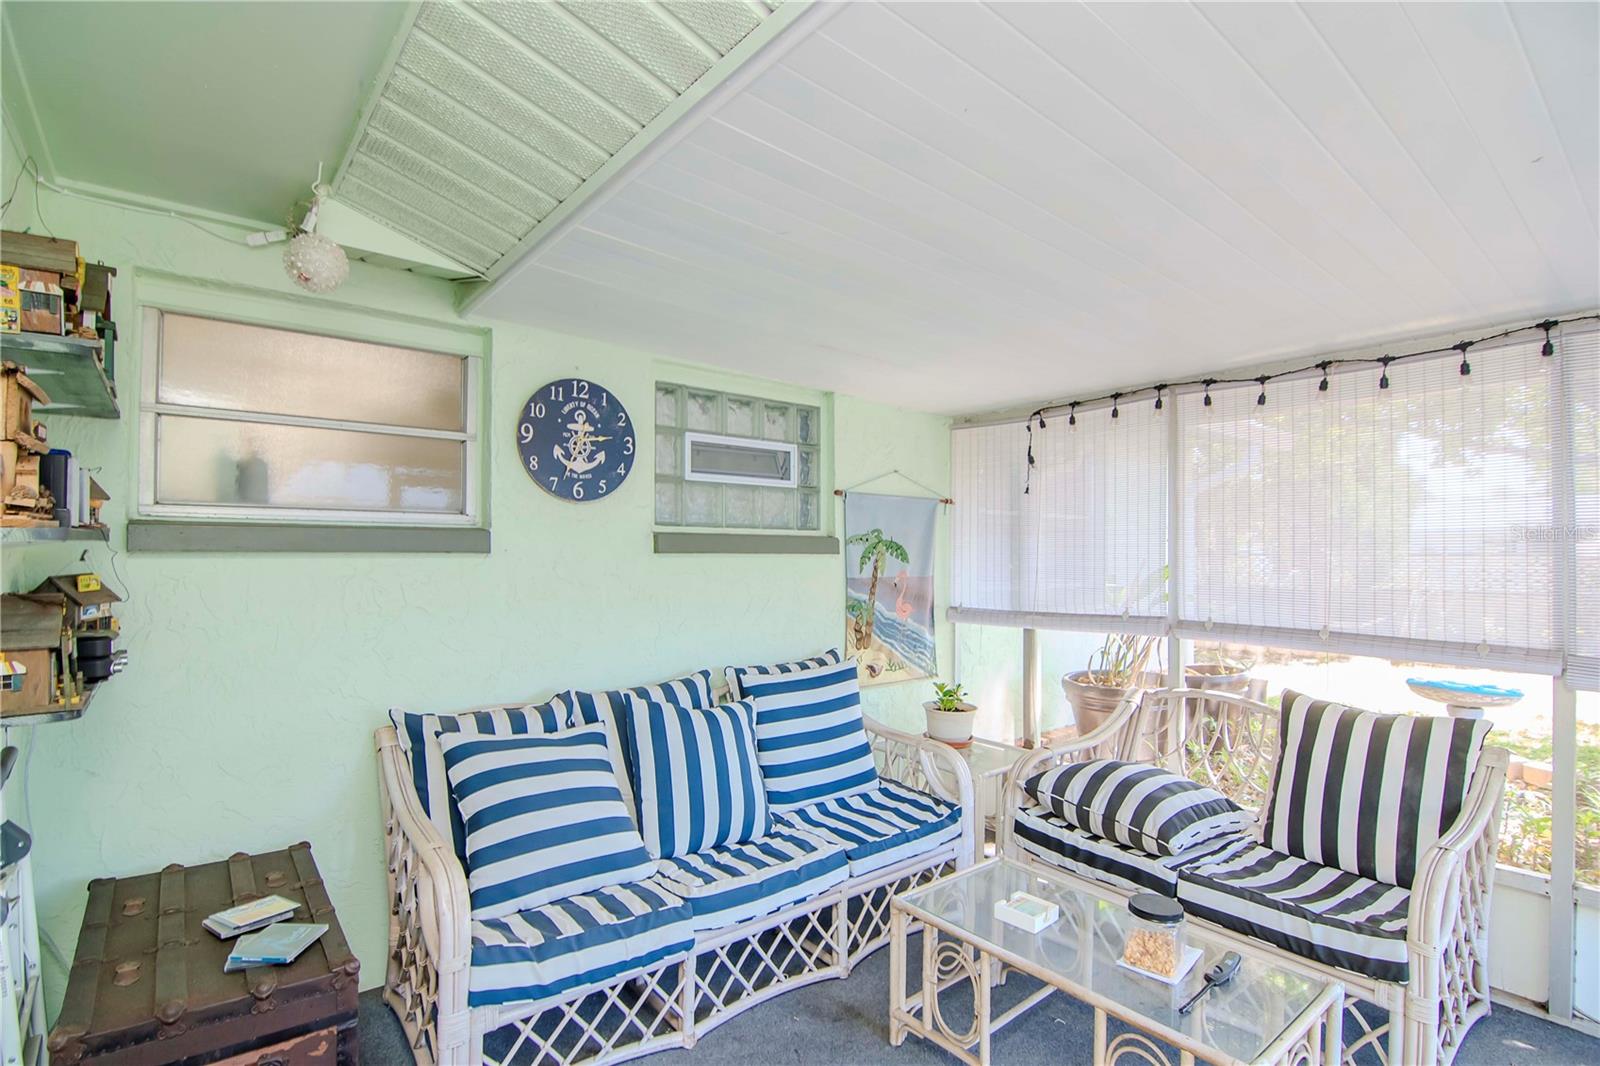 Cozy enclosed porch - perfect for those cool FL nights or morning coffee.